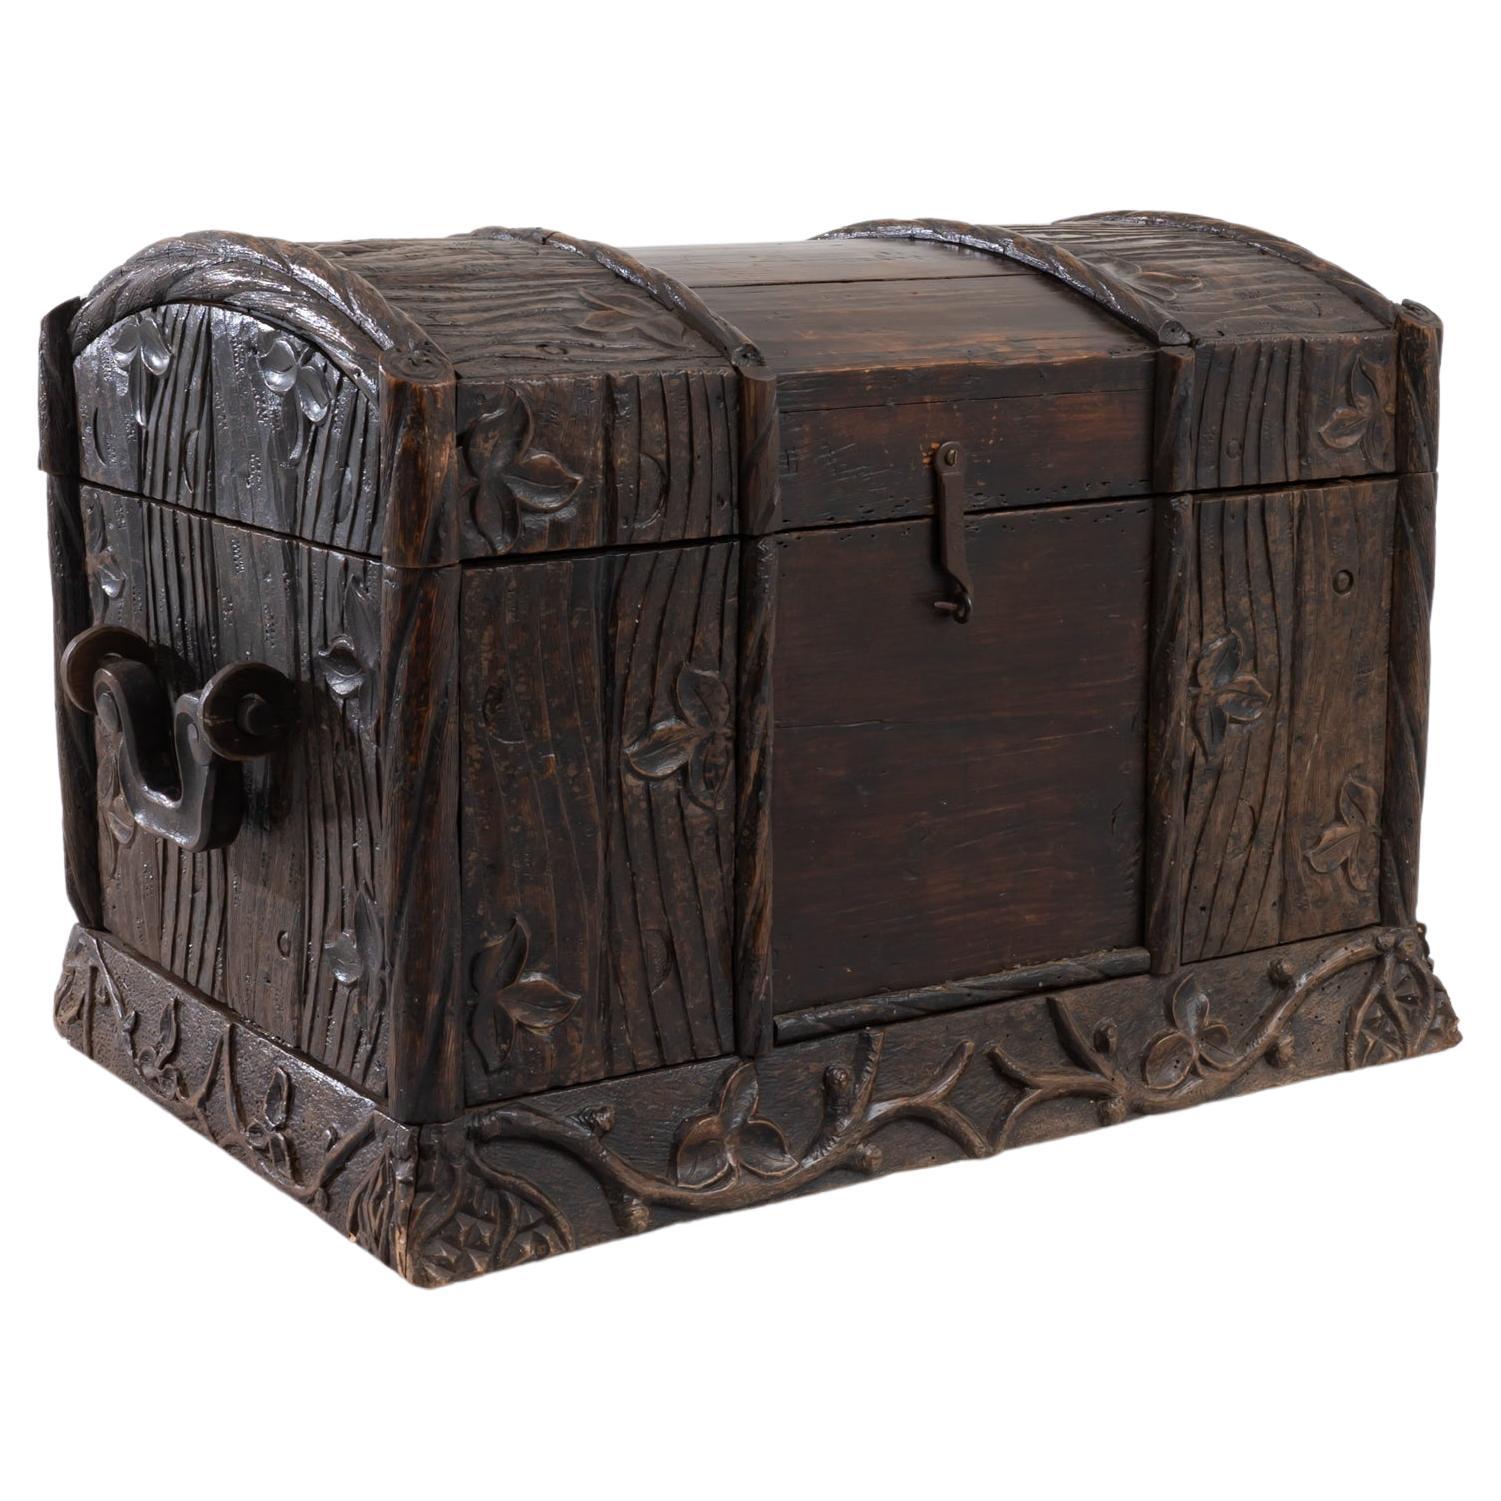 Early 19th Century Austrian Wooden Trunk For Sale